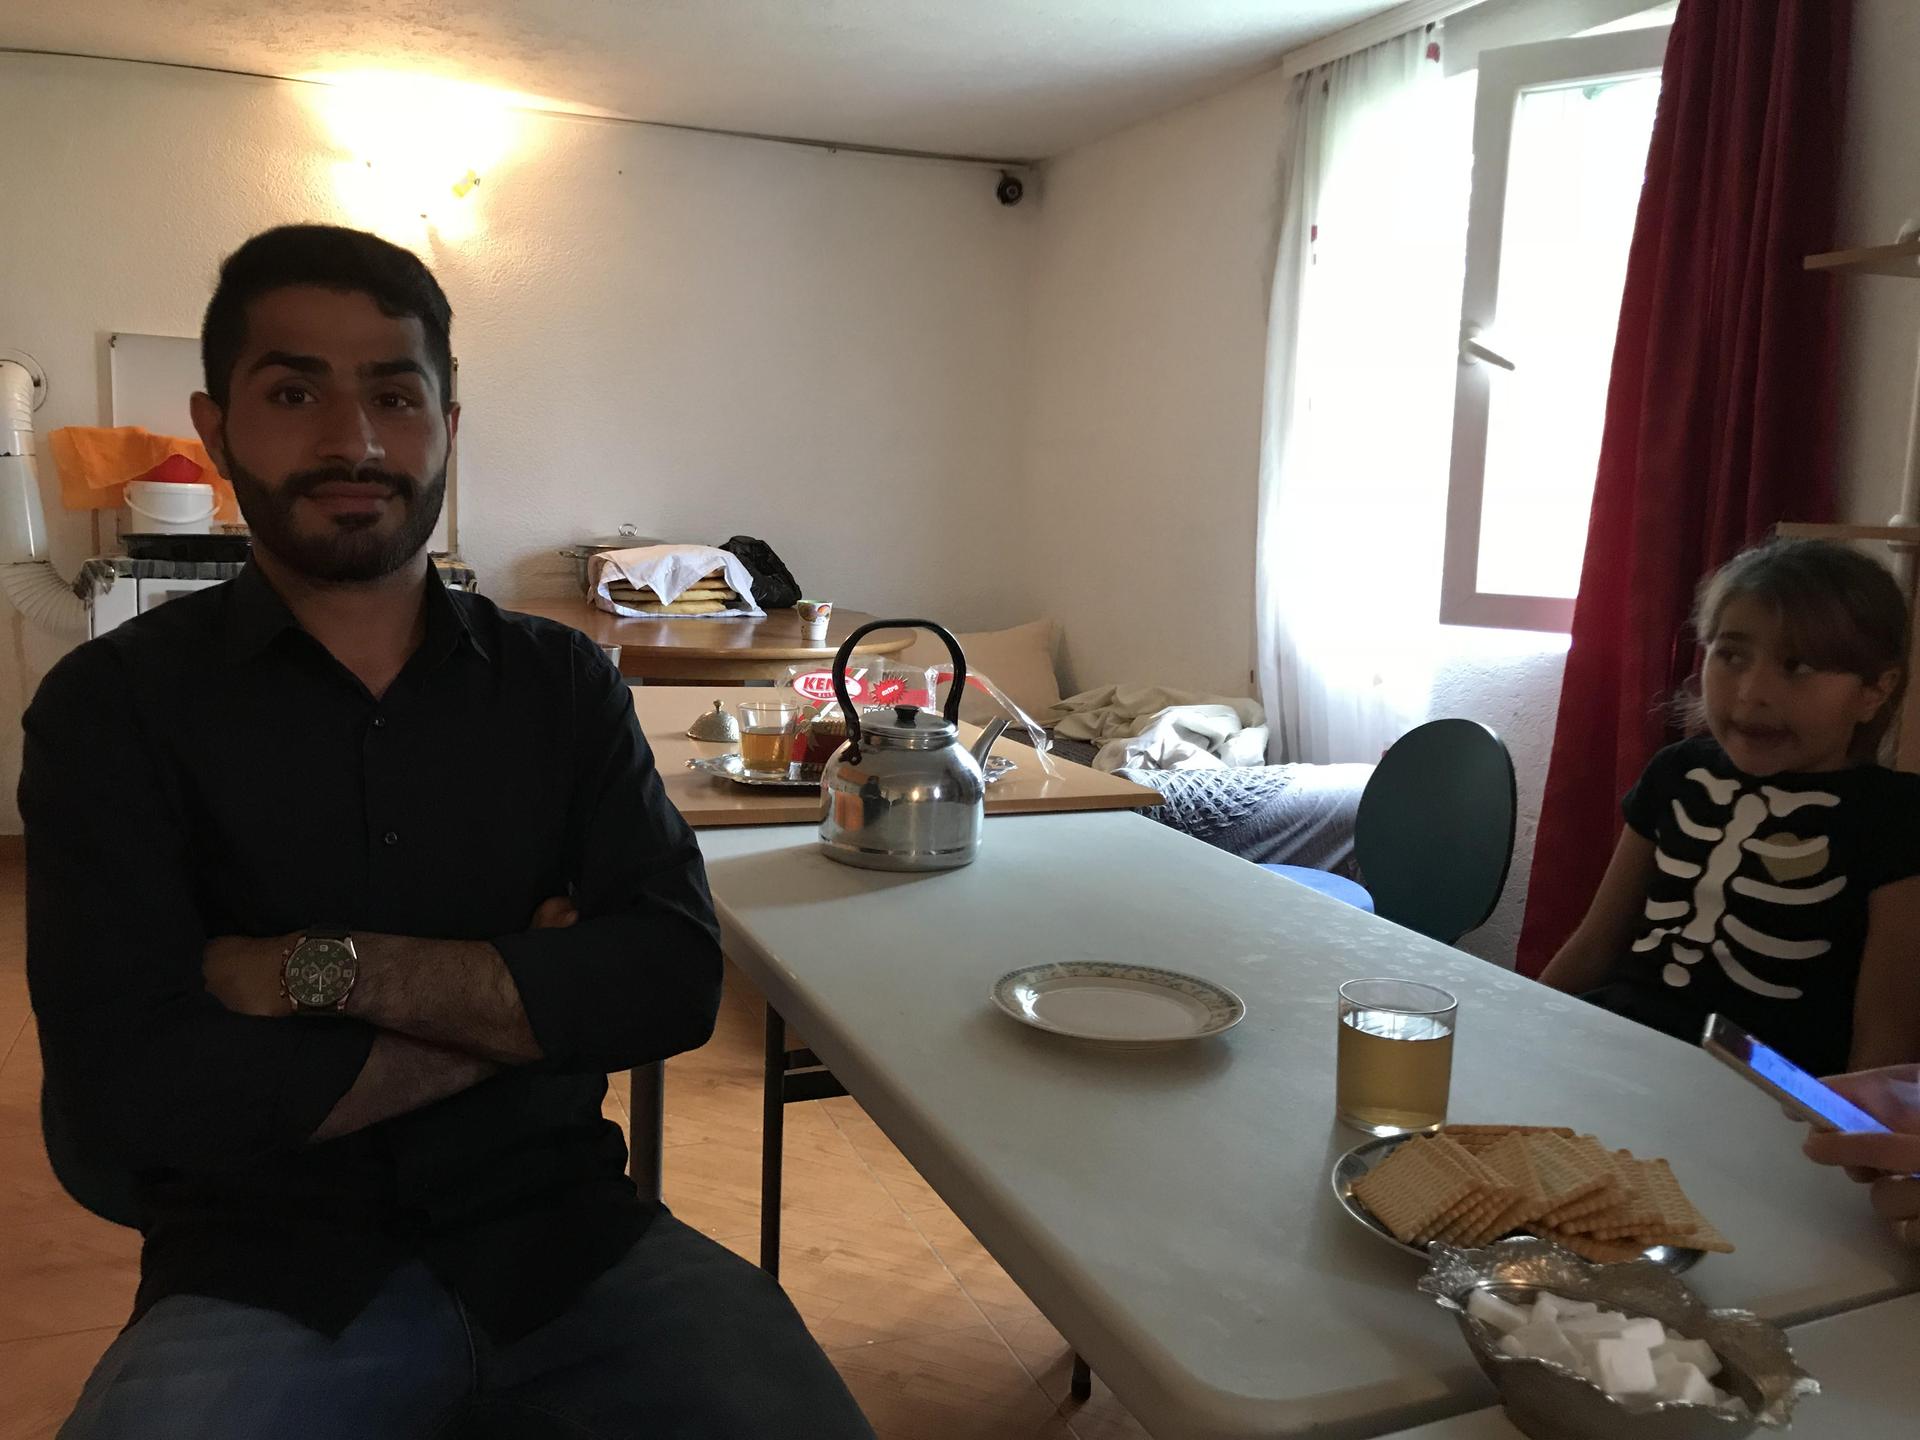 Muhsin Saafi, a refugee from Afghanistan, at an NGO-sponsored safe house in Bihac, Bosnia. He and his family have spent two years trying to reach Germany.